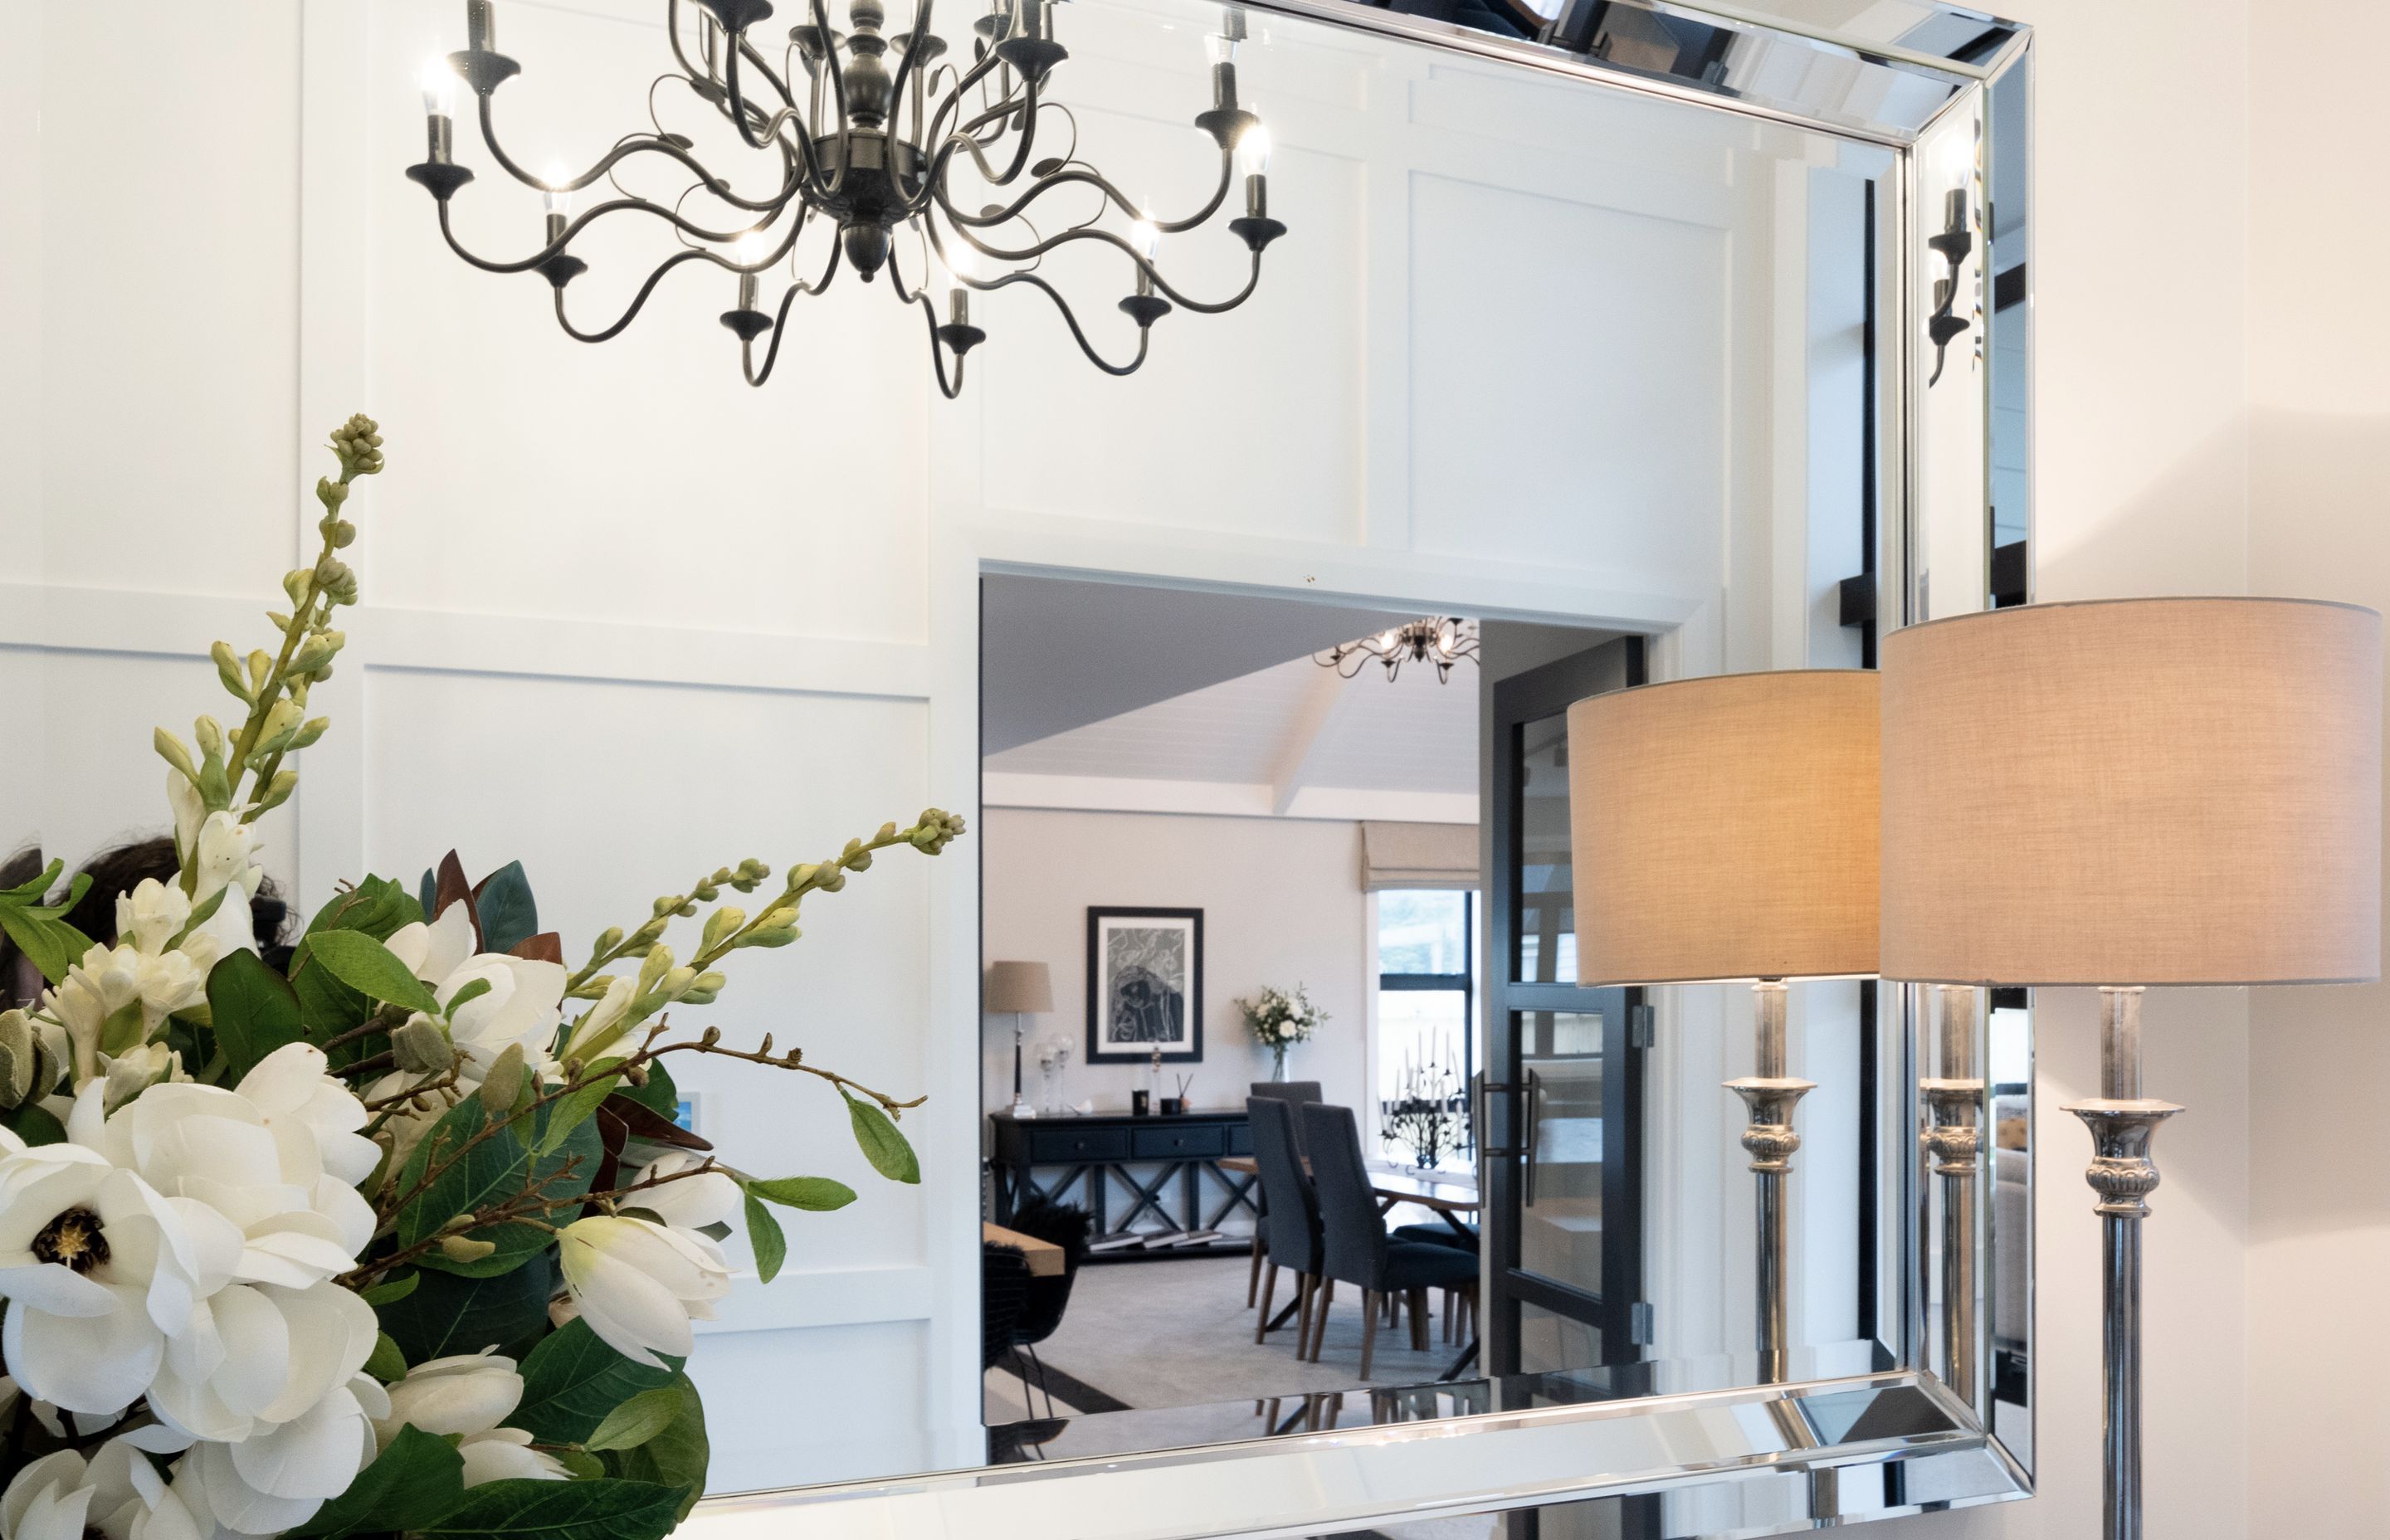 Opulent details such as chandeliers and mirrors elevate the interior spaces.